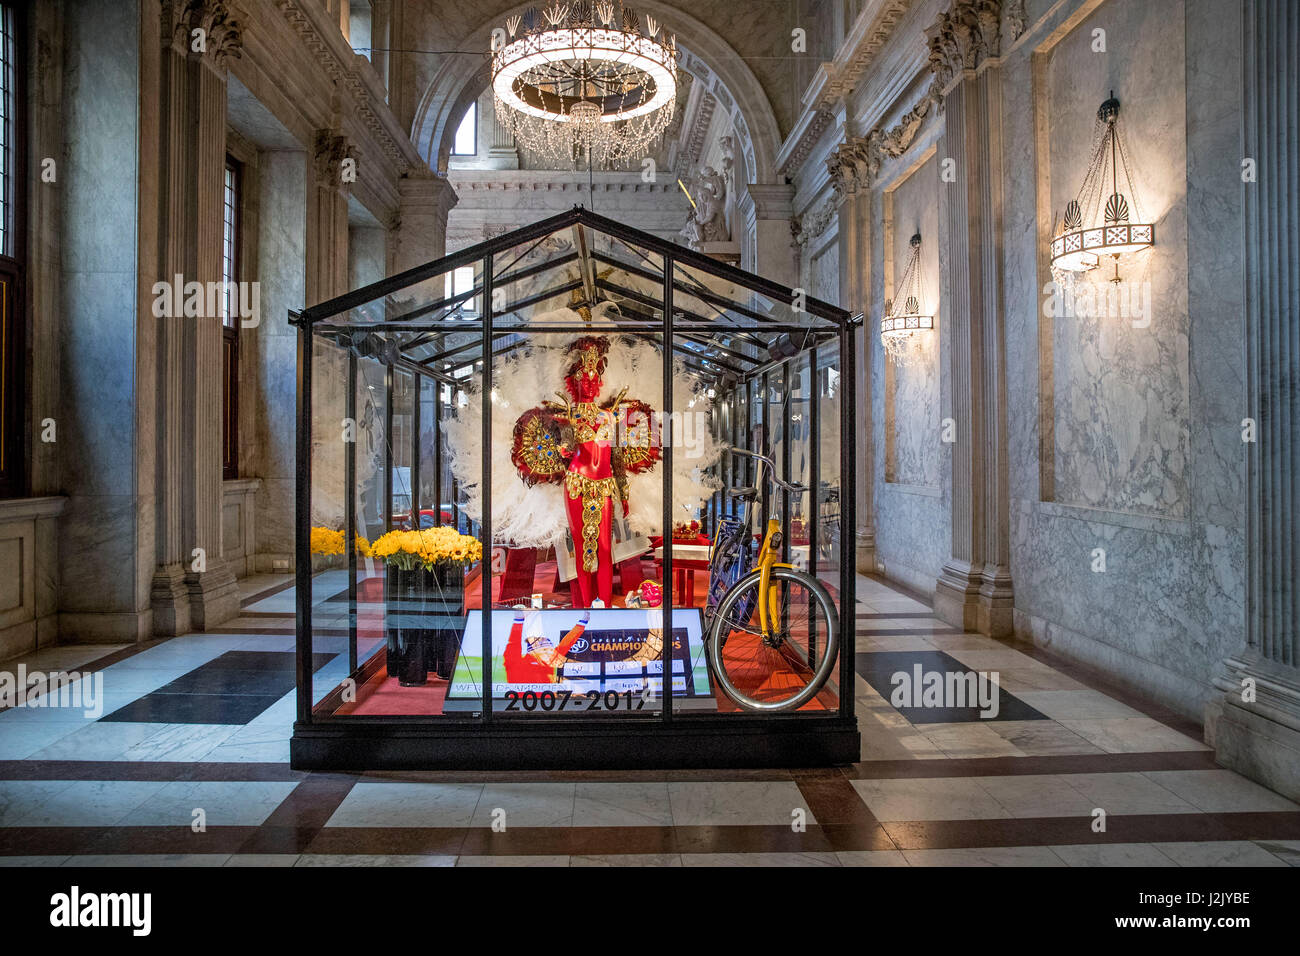 Exhibition with performances and objects from 1967 till 2017 that gives an impression of the last 50 years in The Netherlands in the Royal Palace in Amsterdam, The Netherlands, 28 April 2017. The exhibition will be opened by King Willem-Alexander who celebrates his 50th birthday together with 150 Dutch people during an official diner in the Palace. The exhibition shows pieces like the wedding dress of Queen Maxima, the cradle of King Willem-Alexander but also the Crown, The King's thesis, the shirt of Johan Cruyff, TV figure Meneer de Uil and cloned bull Herman./ POINT DE VUE Stock Photo